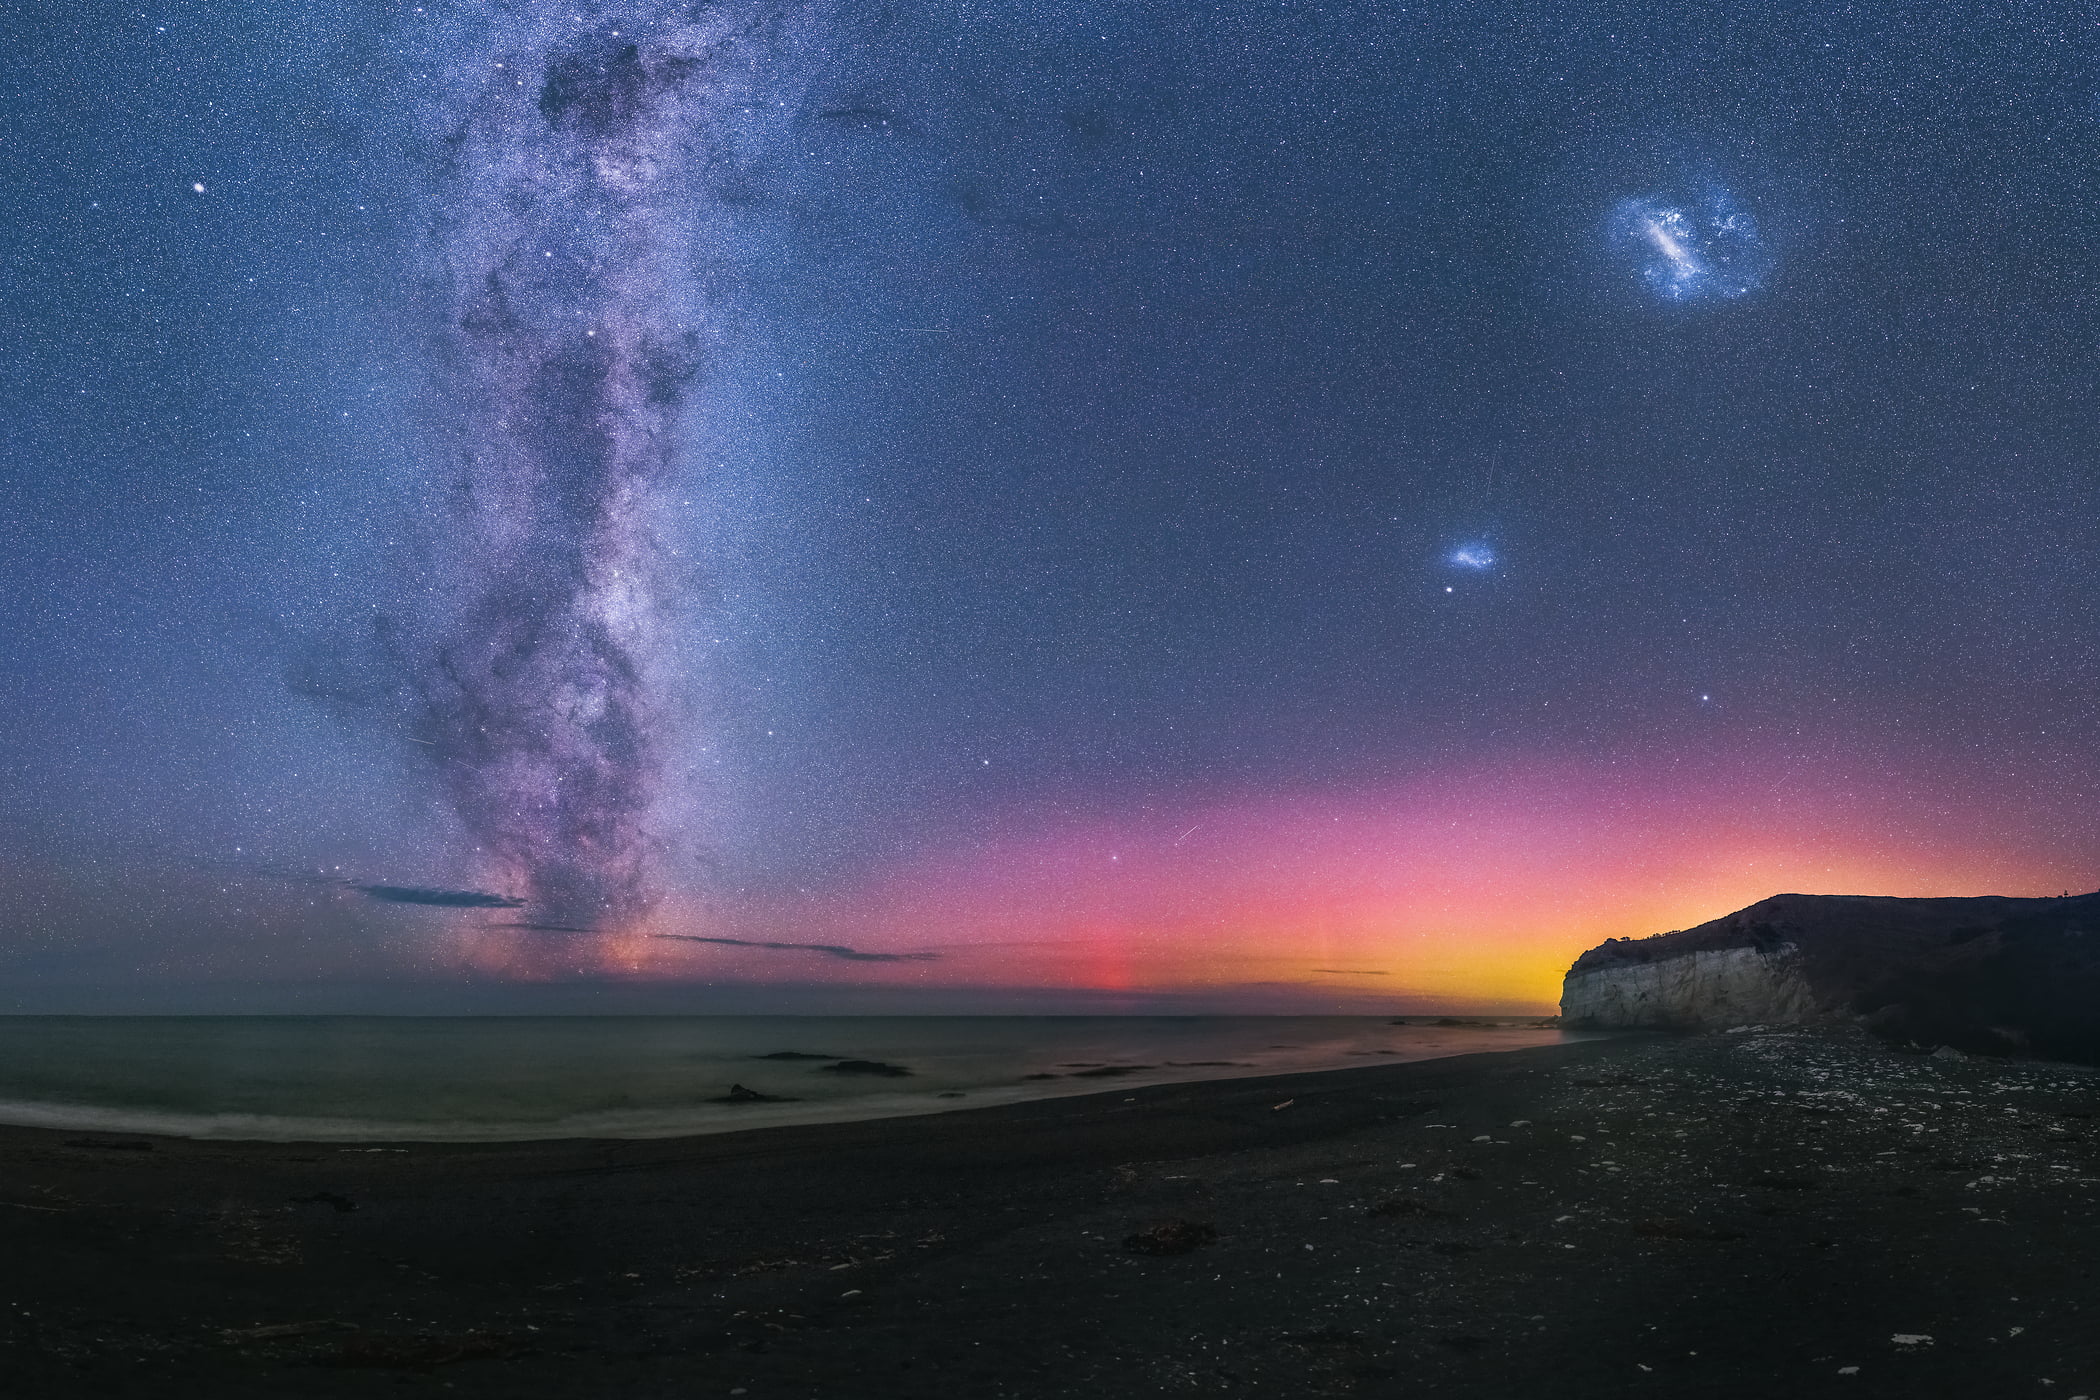 261 megapixels! A very high resolution, large-format VAST photo print of the night sky, milky way, and stars over the ocean and a beach; fine art astrophotography landscape photo created by Paul Wilson in Nape Nape, New Zealand